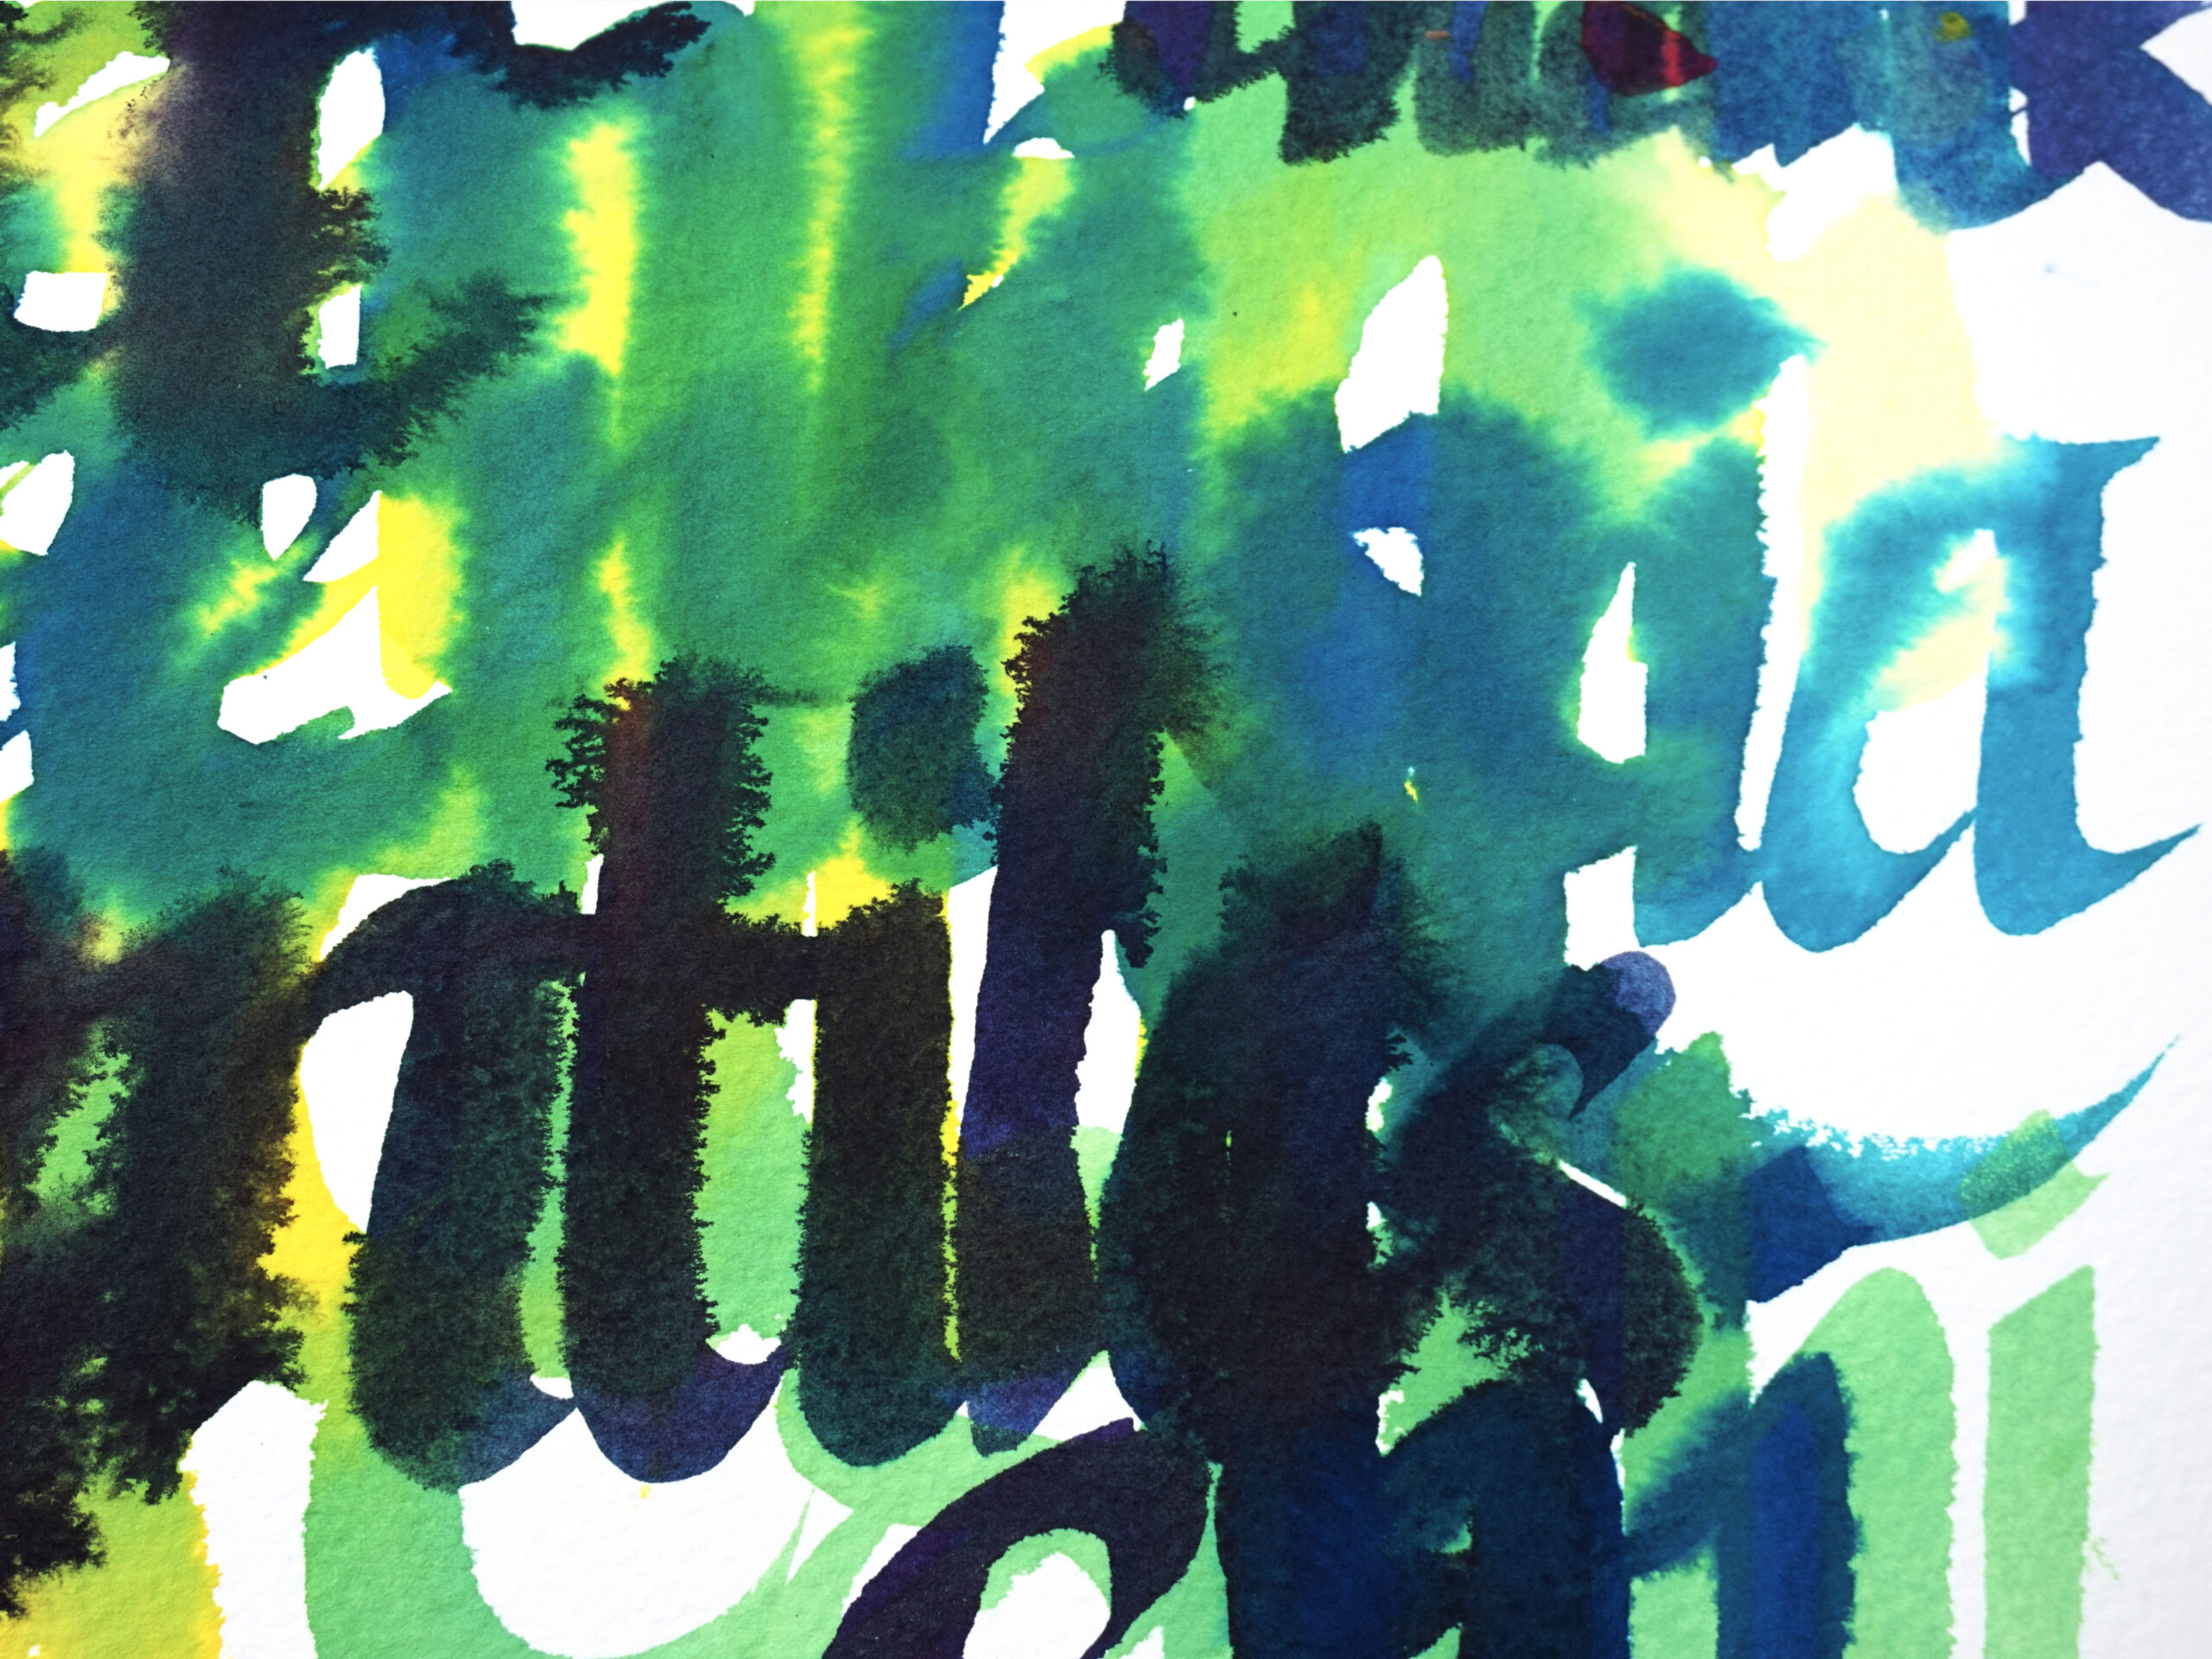 close up of watery calligraphy reads "thank you artemisia gentileschi" (illegible) in yellow, black, blue, and green